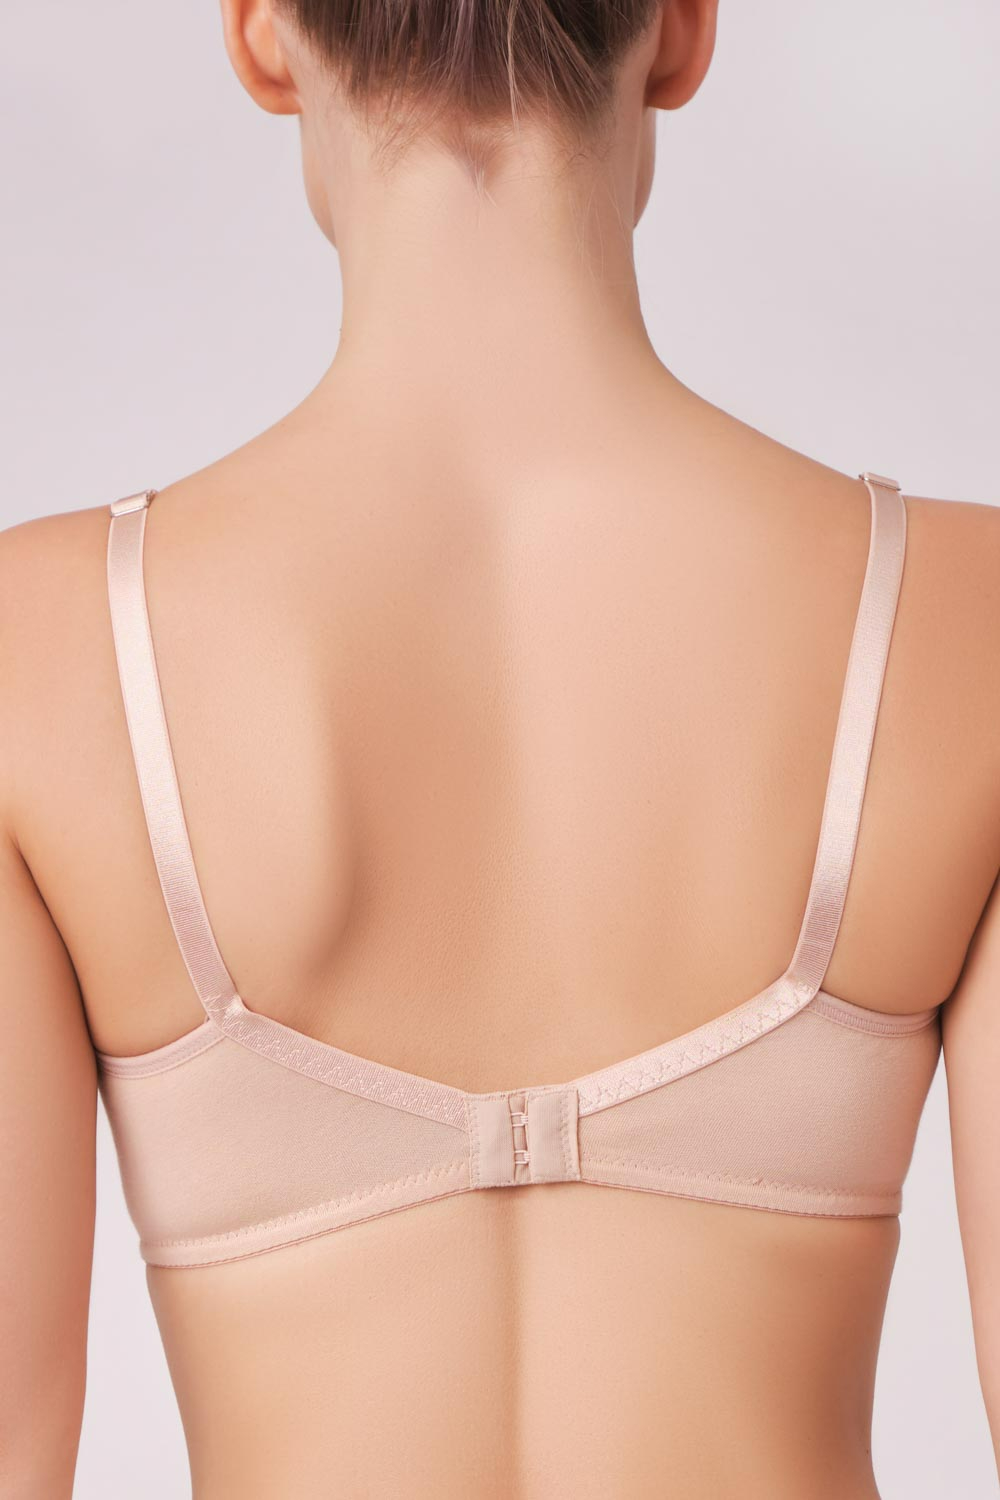 Odel Padded Non Wired Nude Color Bra